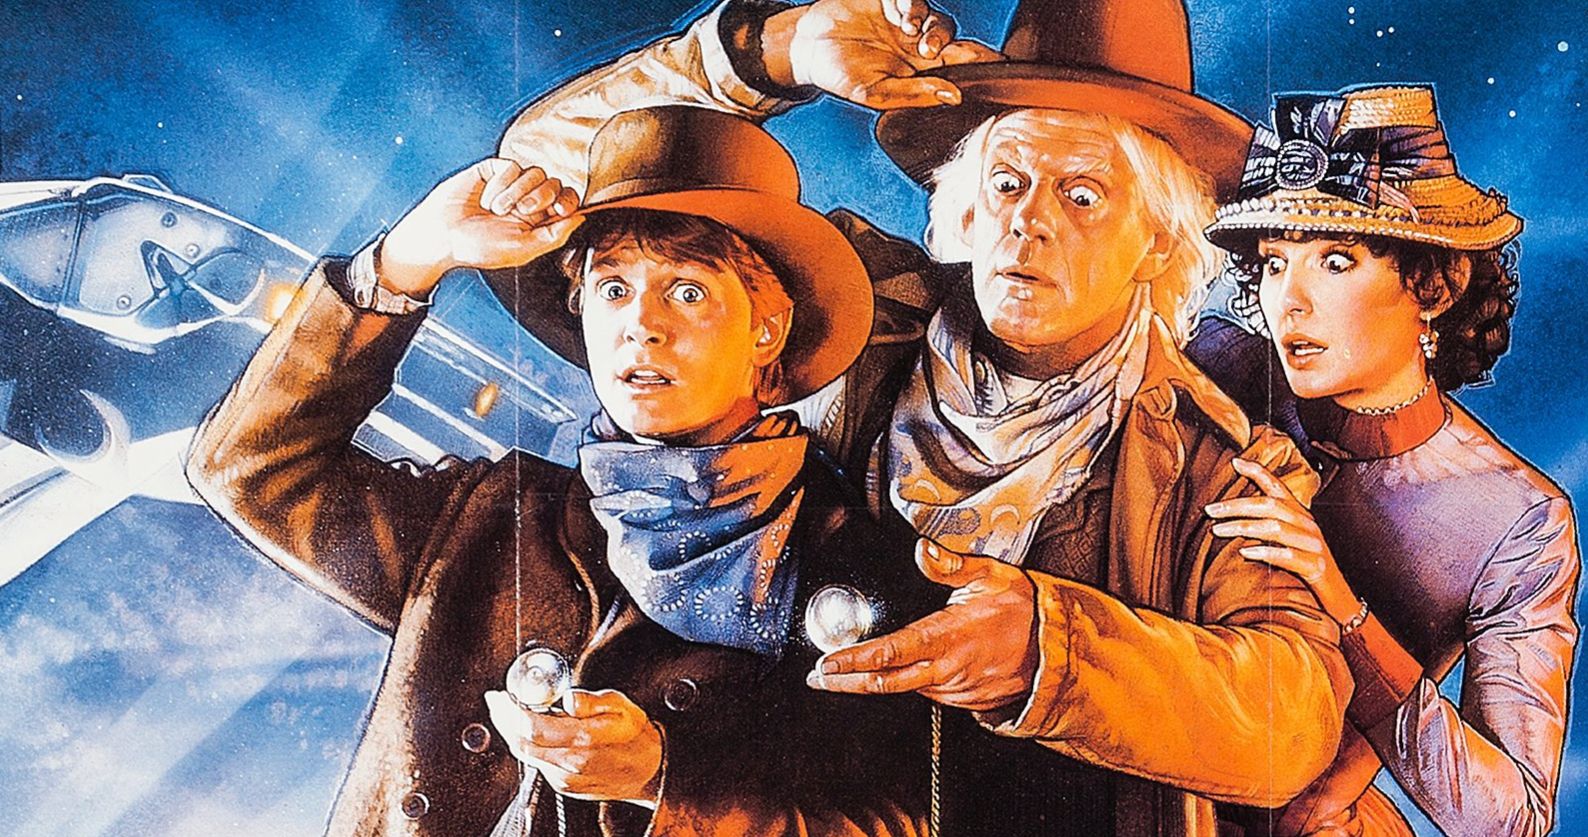 Back to the Future Part III 30th Anniversary Is Today, and Fans Are Celebrating on Twitter